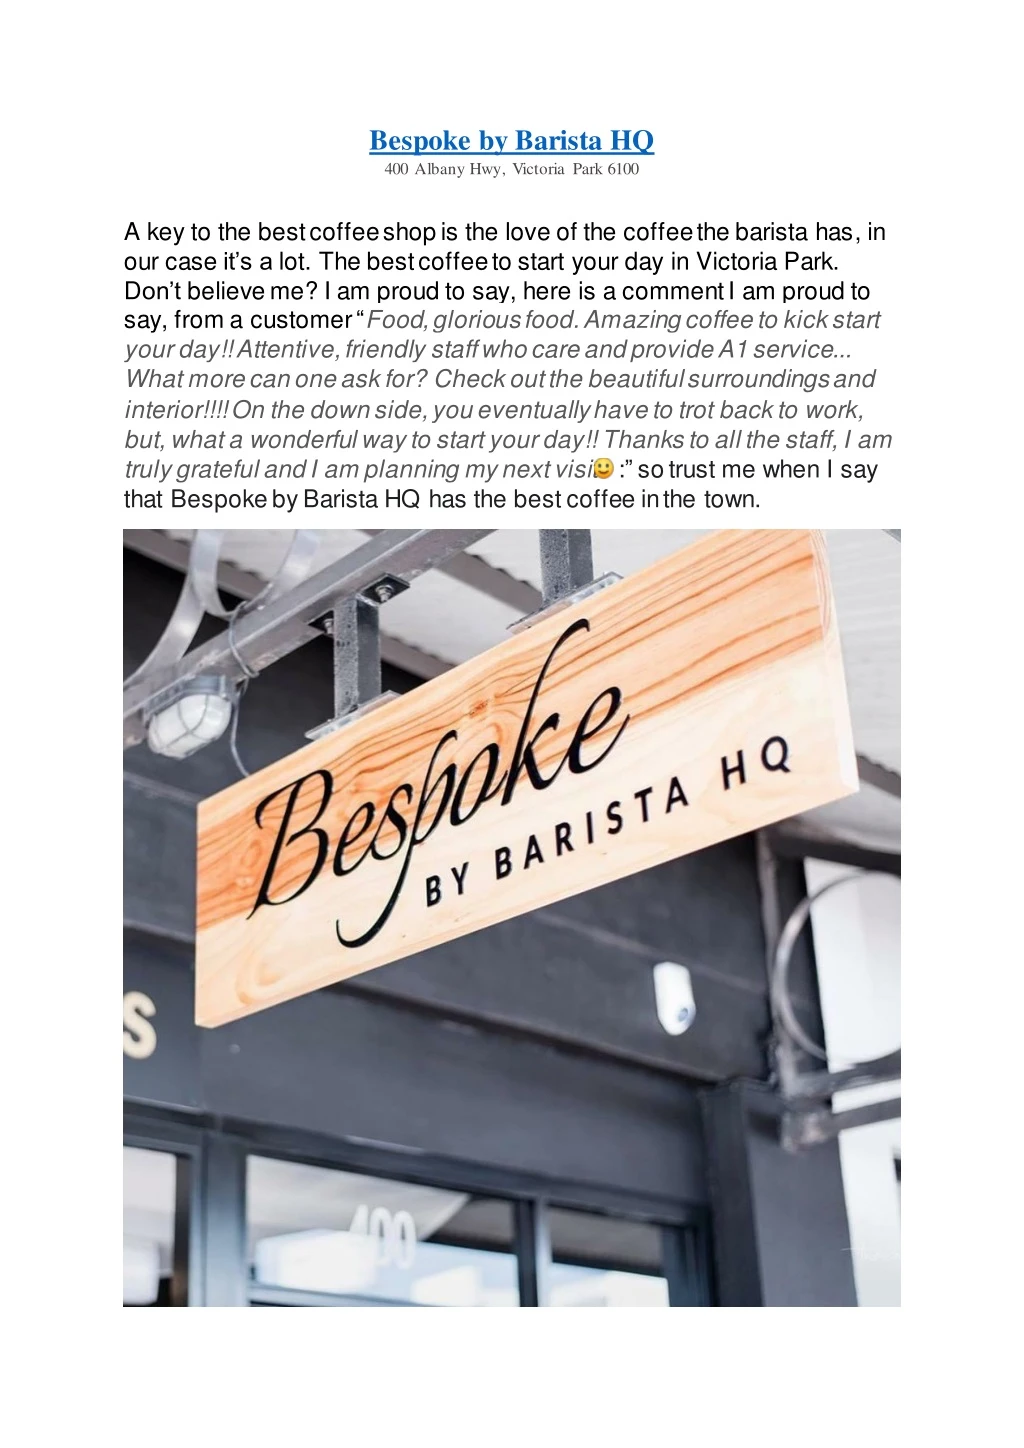 bespoke by barista hq 400 albany hwy victoria